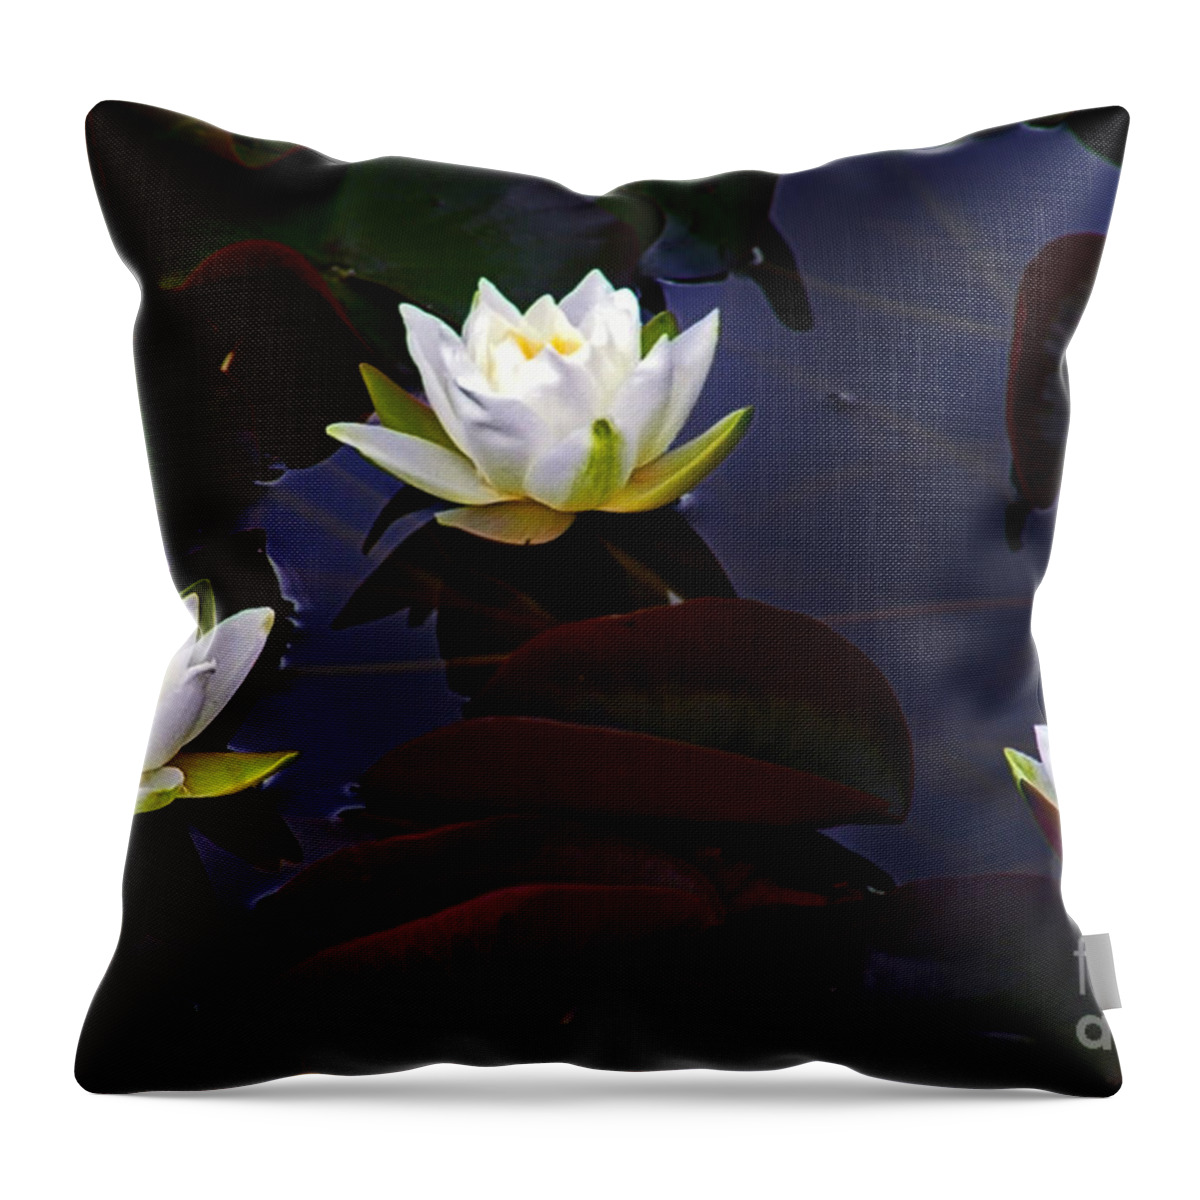 Water Lily Throw Pillow featuring the photograph White Water Lilies by Nina Ficur Feenan